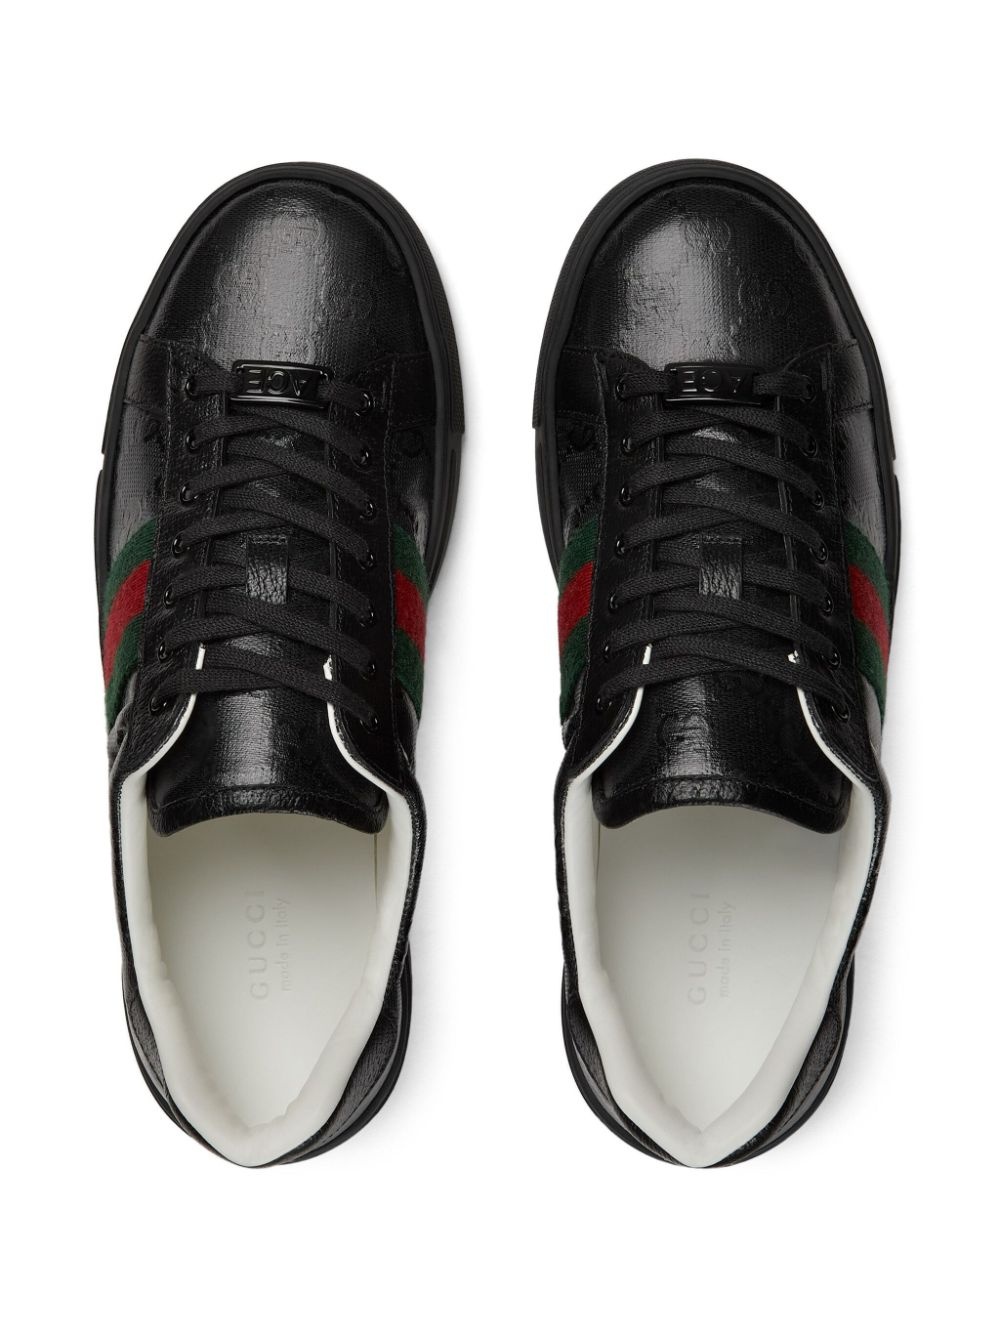 Gucci Ace Web Detail Sneakers - 2